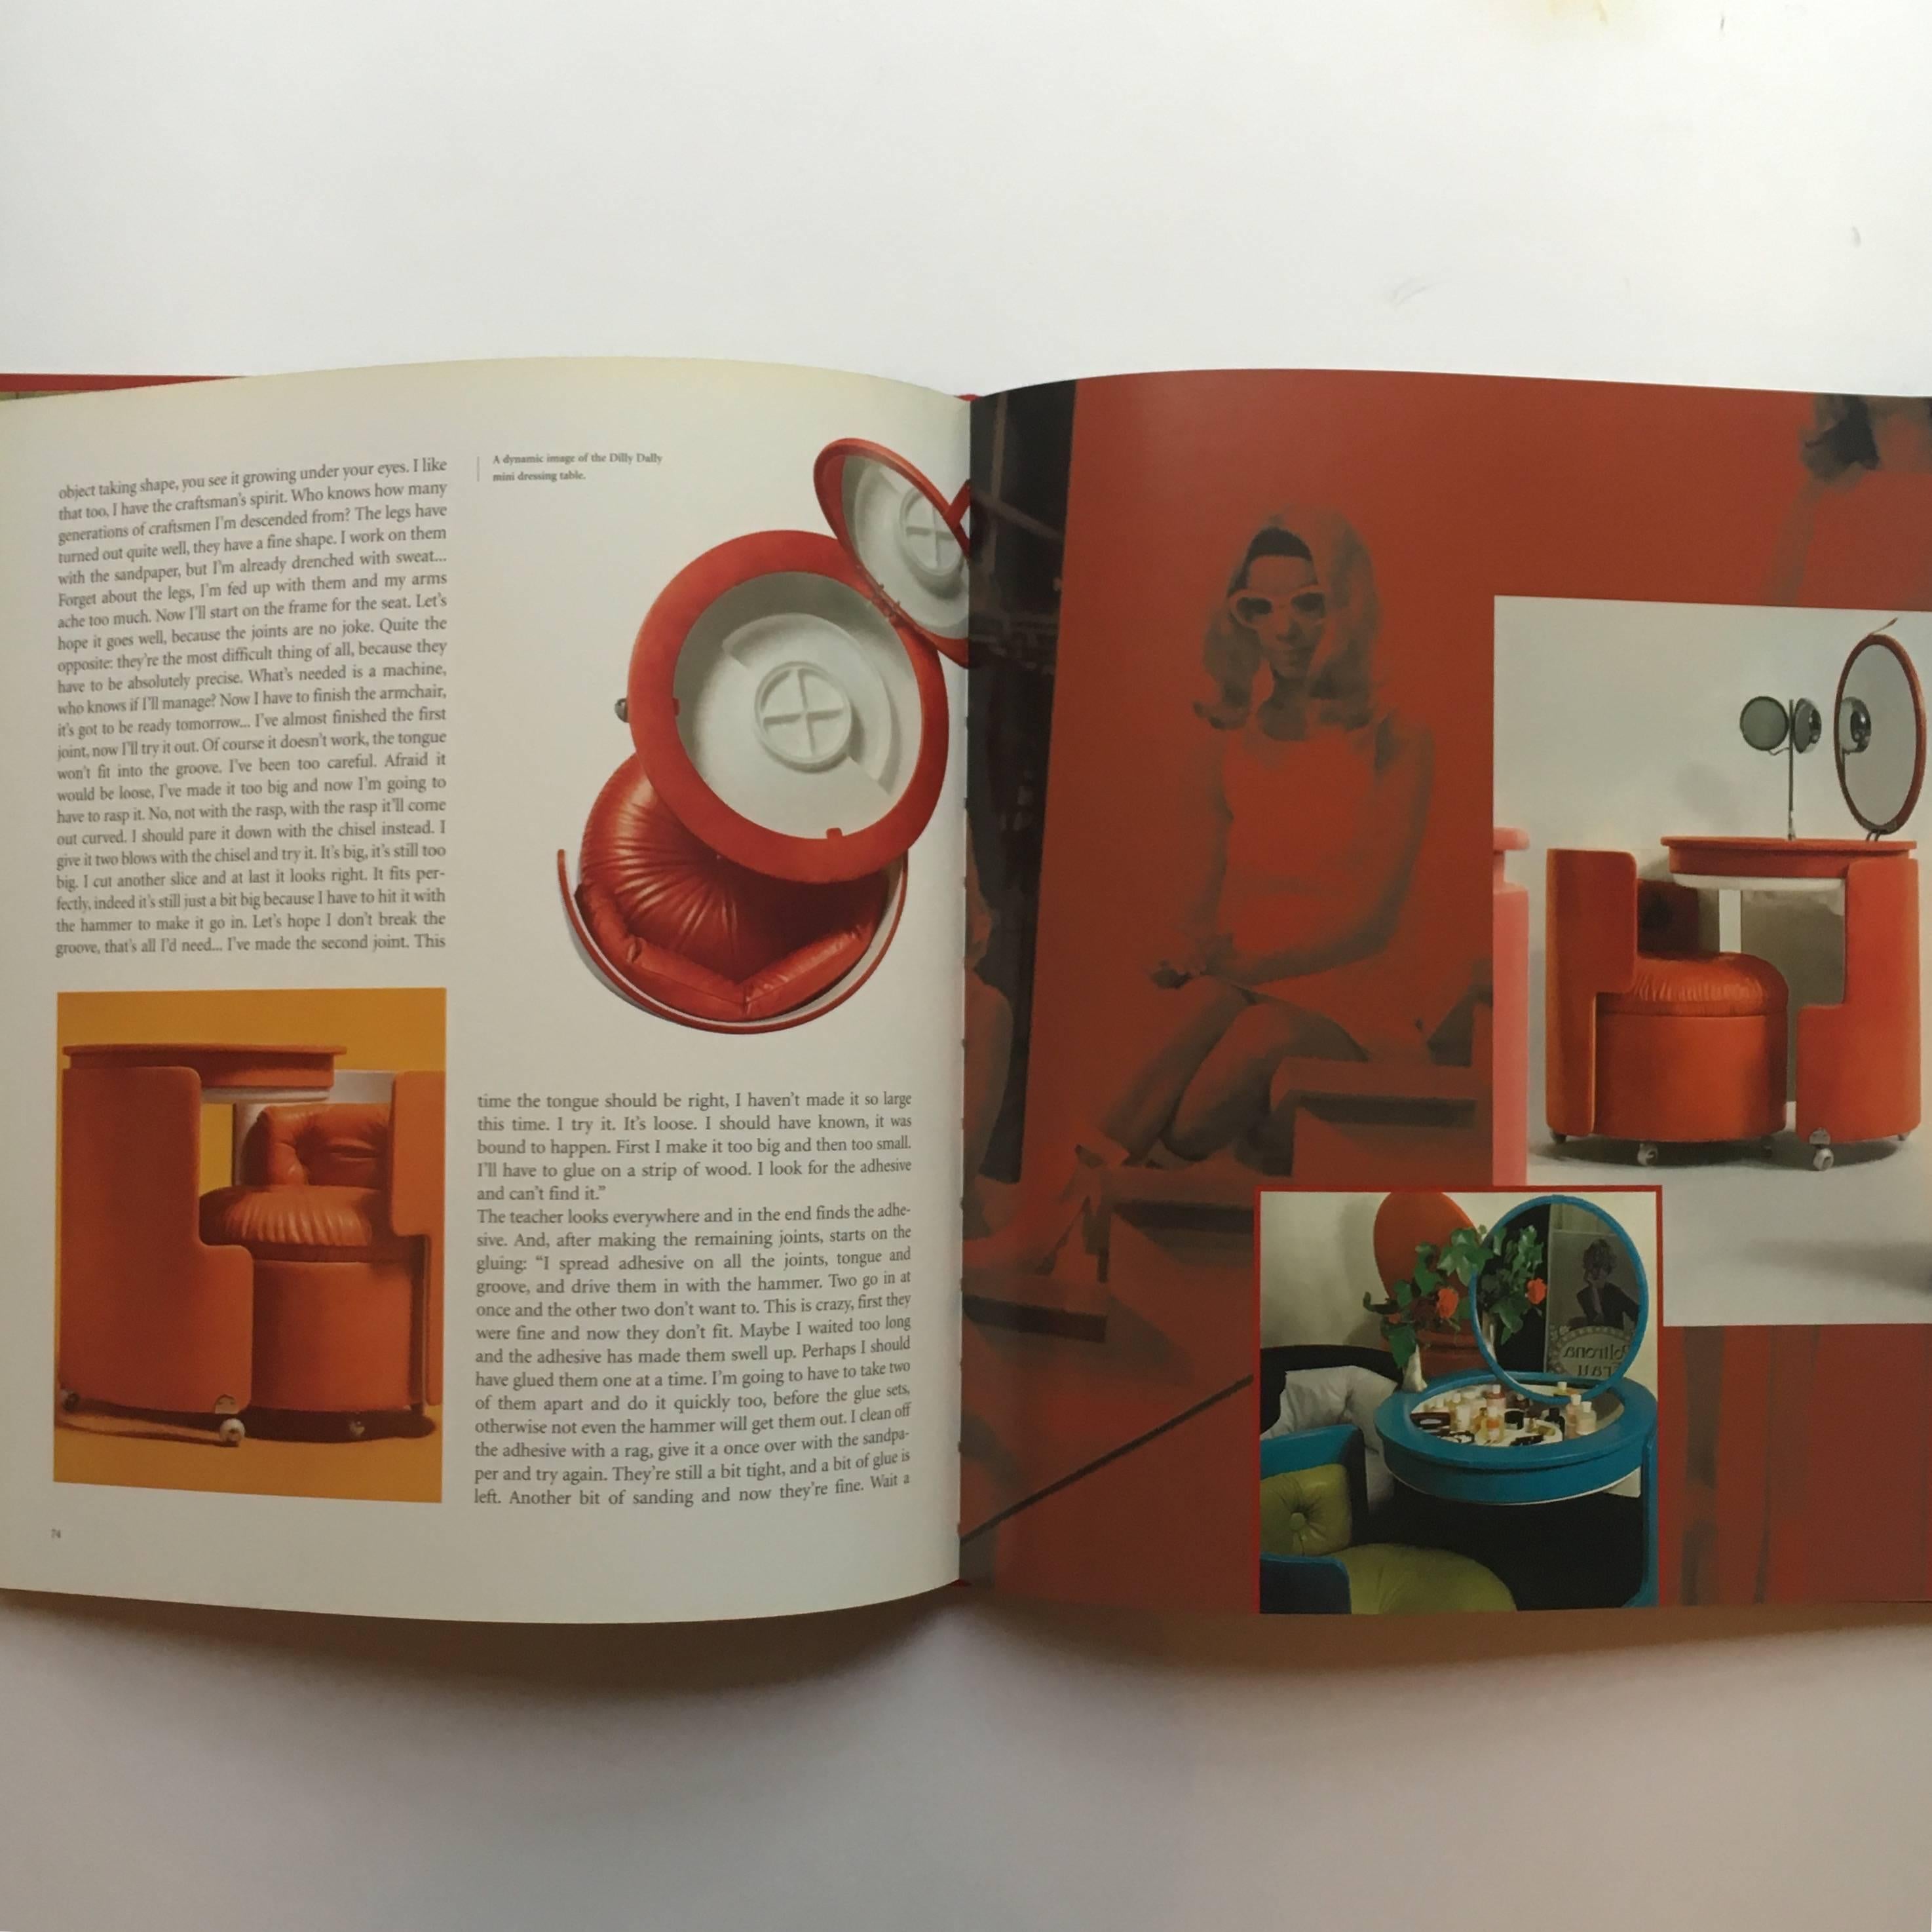 First edition, published by Electa, 2000.

From one of the world's most renowned furniture designers, this book illustrates, with a copious amount of photographs, some of the most significant items produced in the Poltrona range. From the